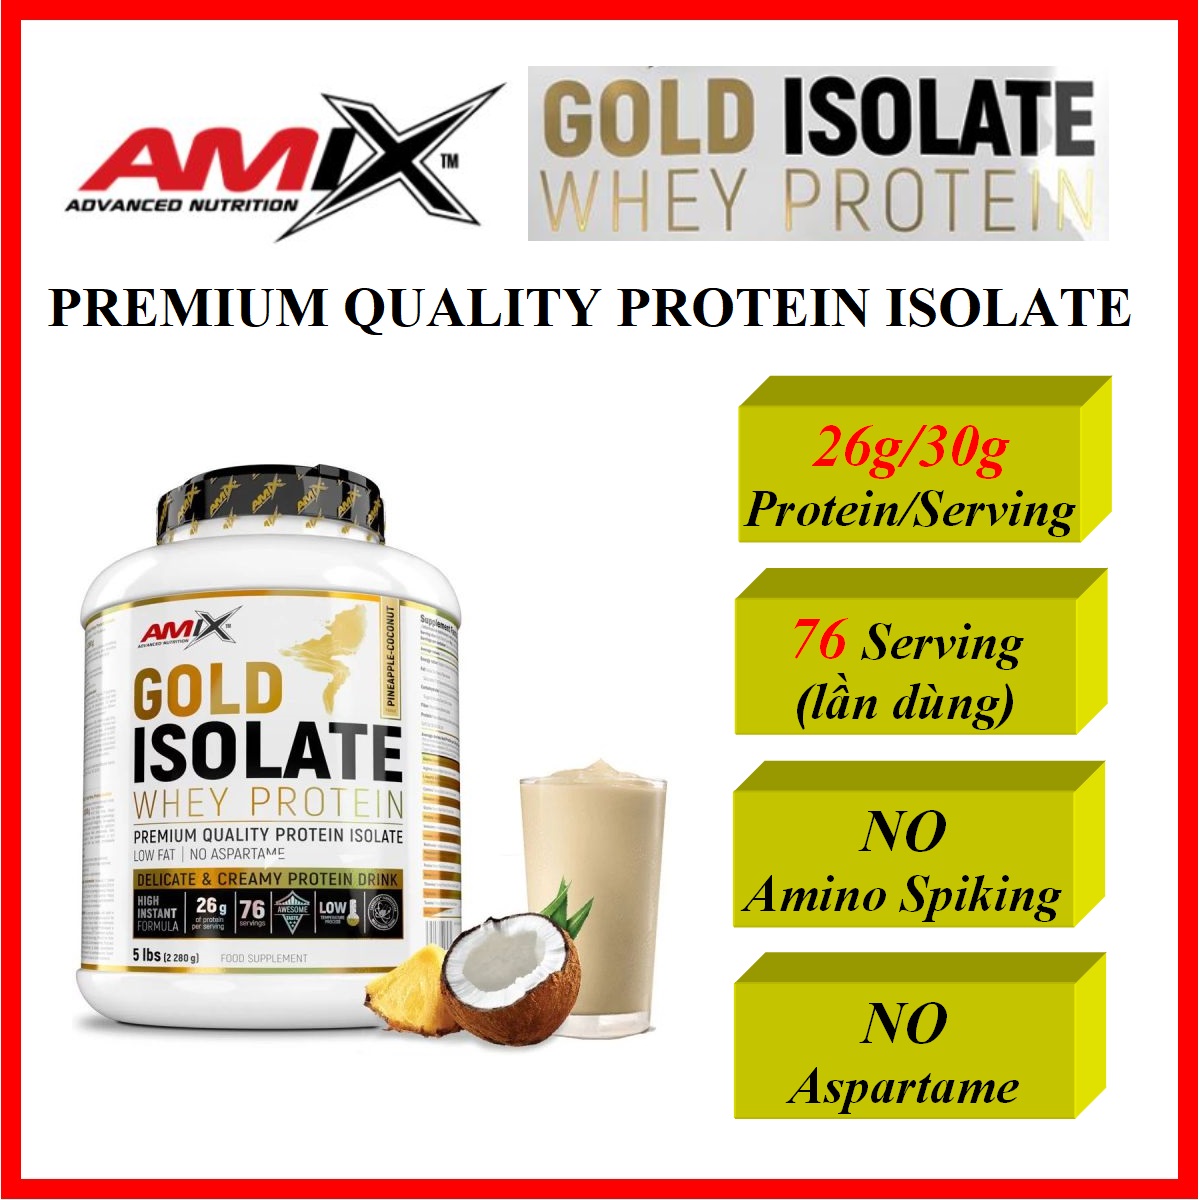 Amix Gold Isolate Whey Protein 5Lbs 76 lần dùng Bổ sung Protein, Tăng Cơ